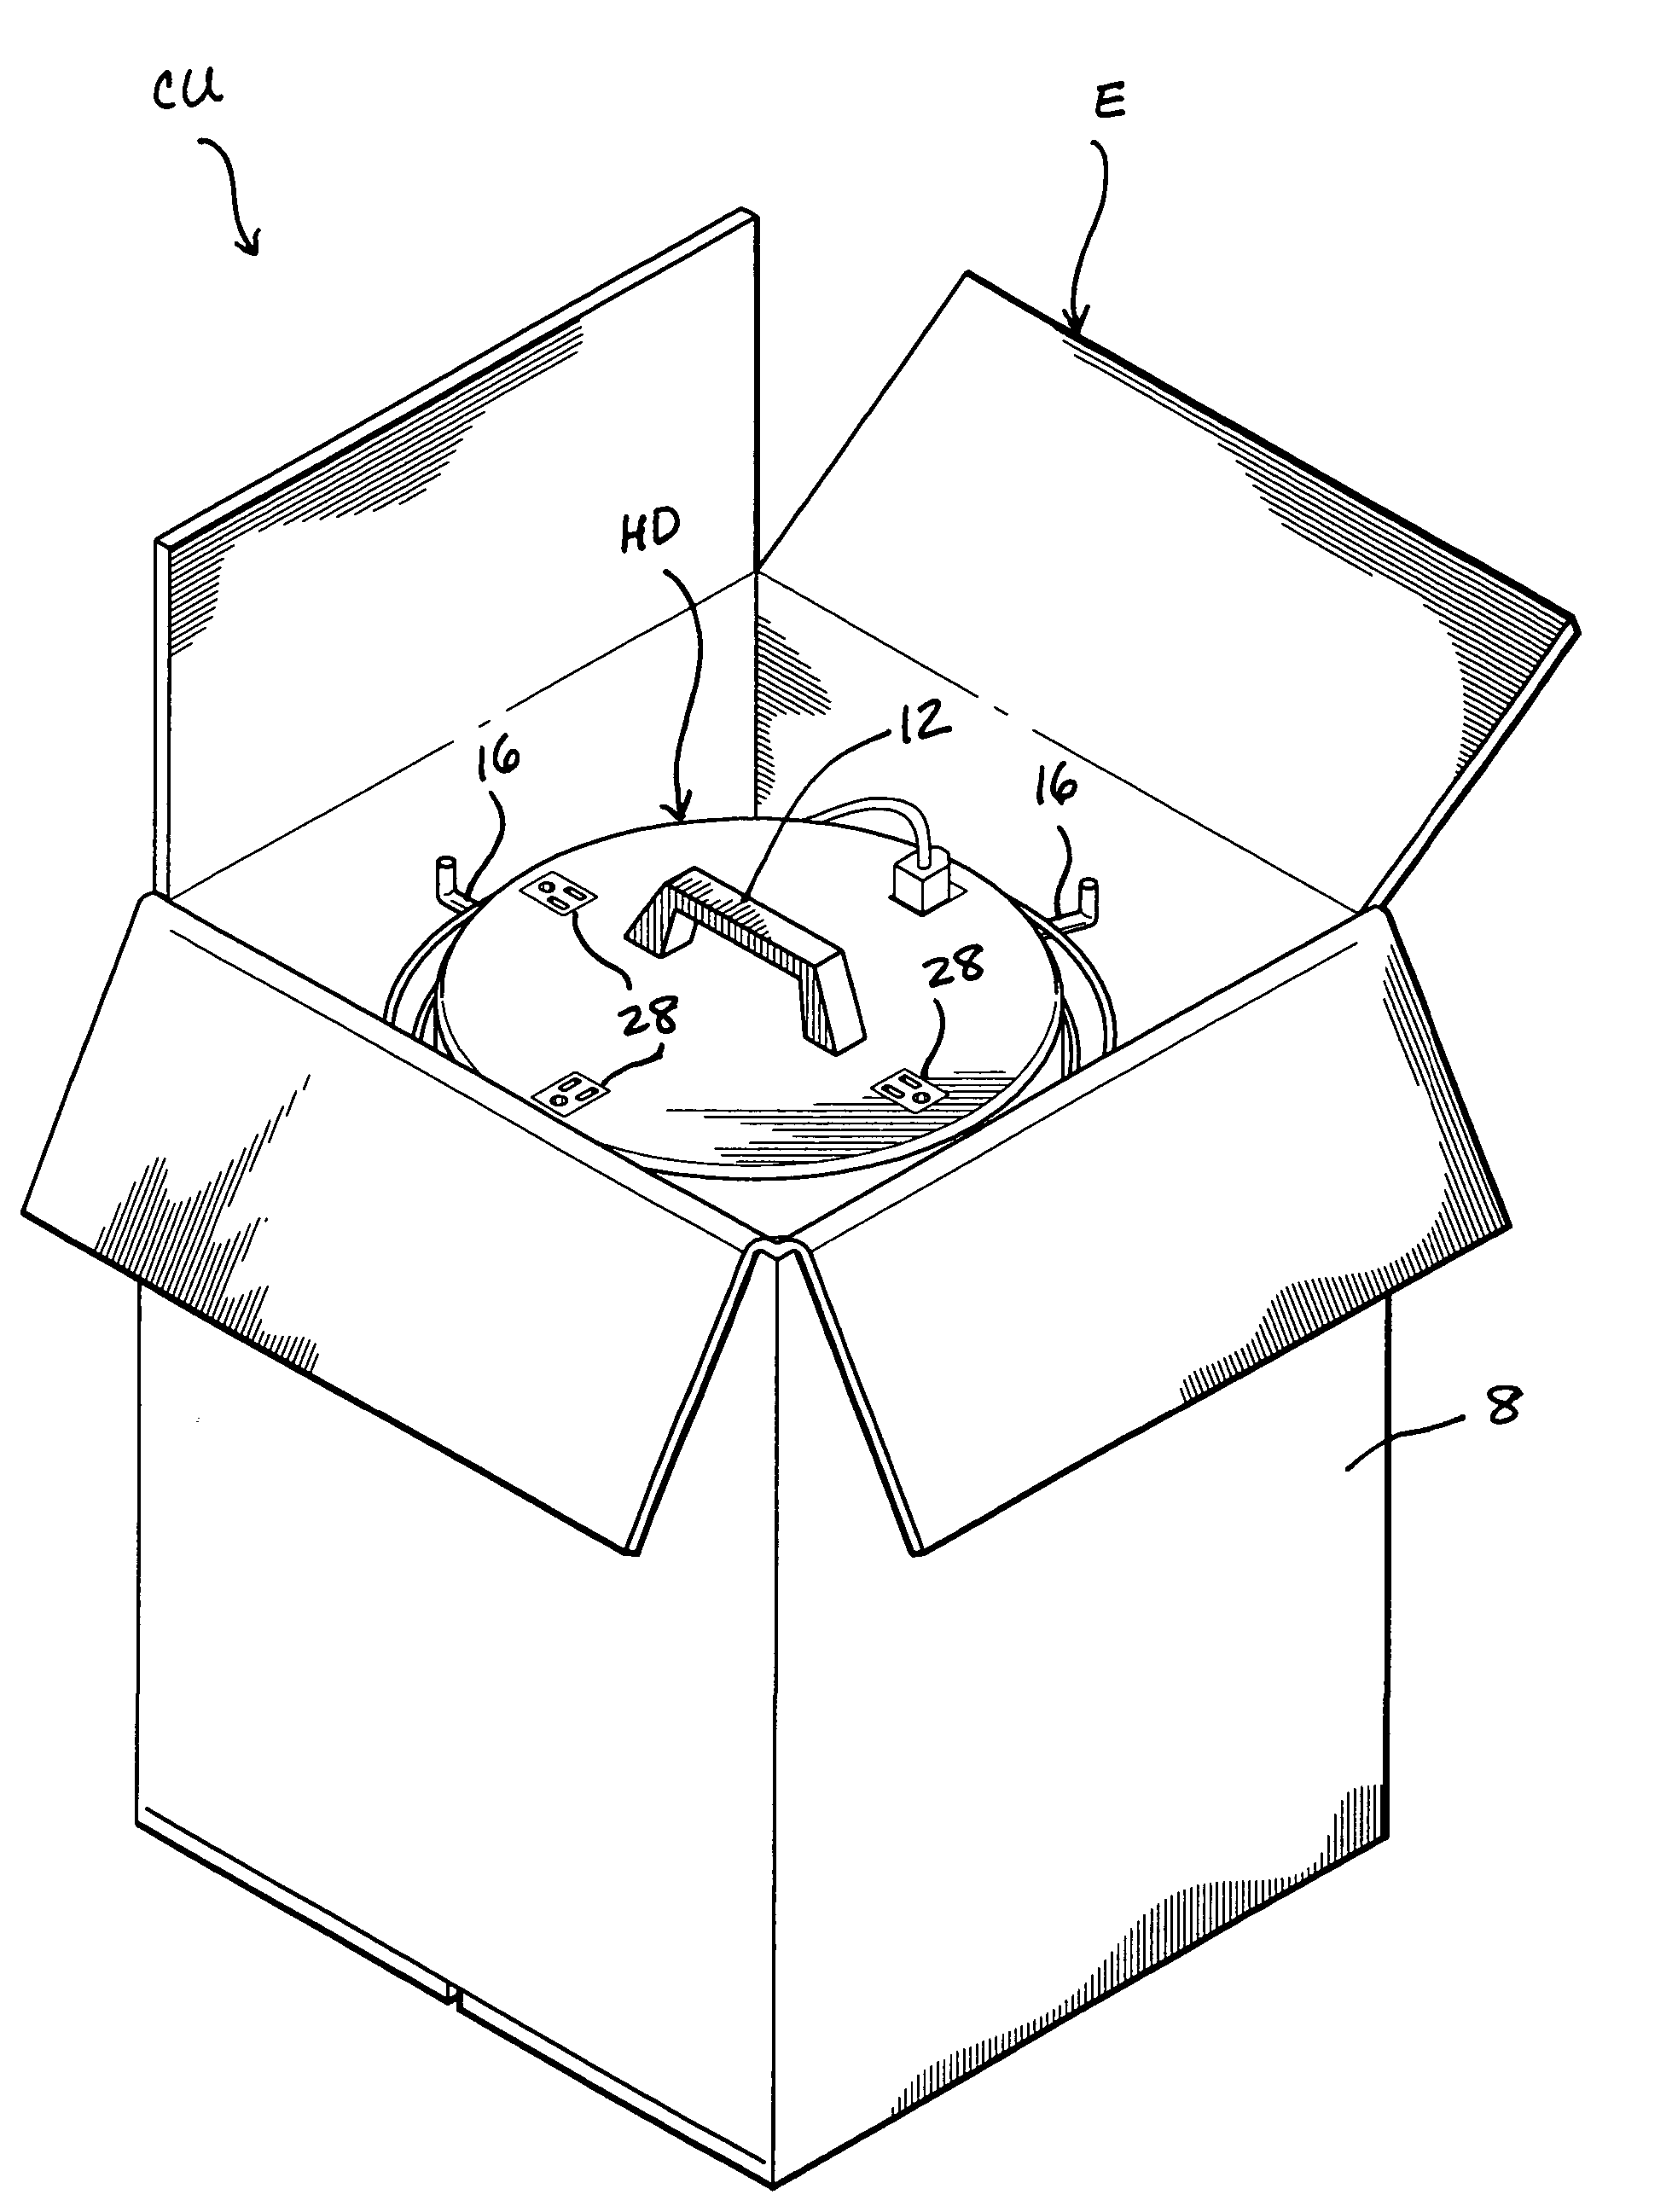 Device for holding decorative string lights